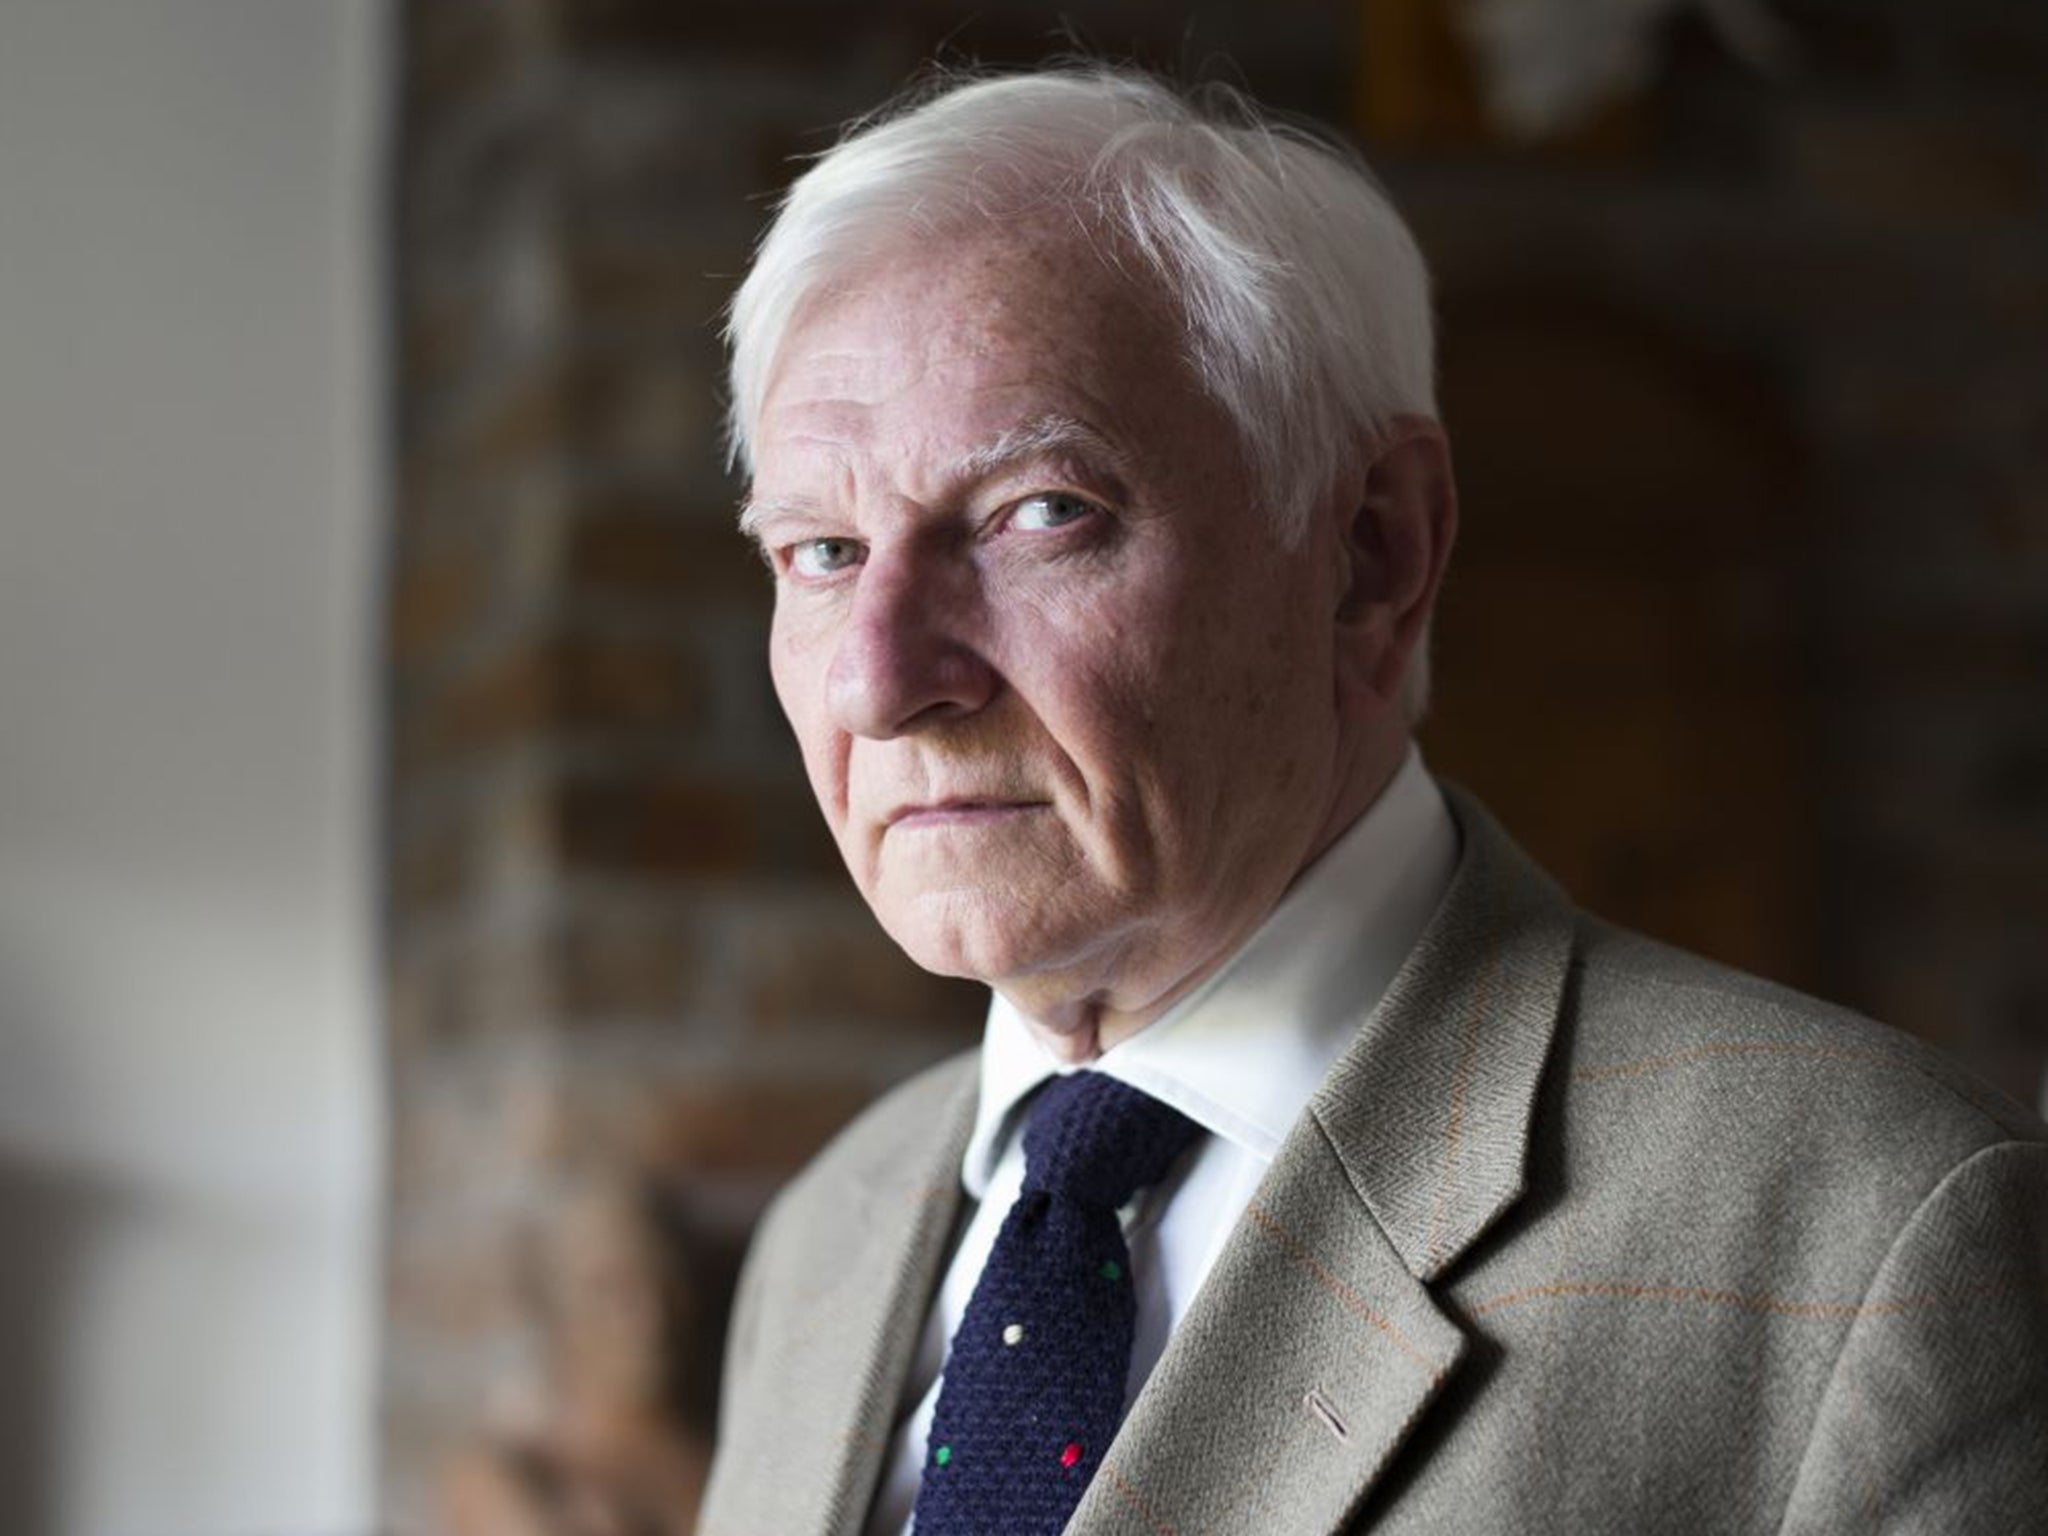 Harvey Proctor's home was raided by the Met under a warrant investigating historical child sexual abuse